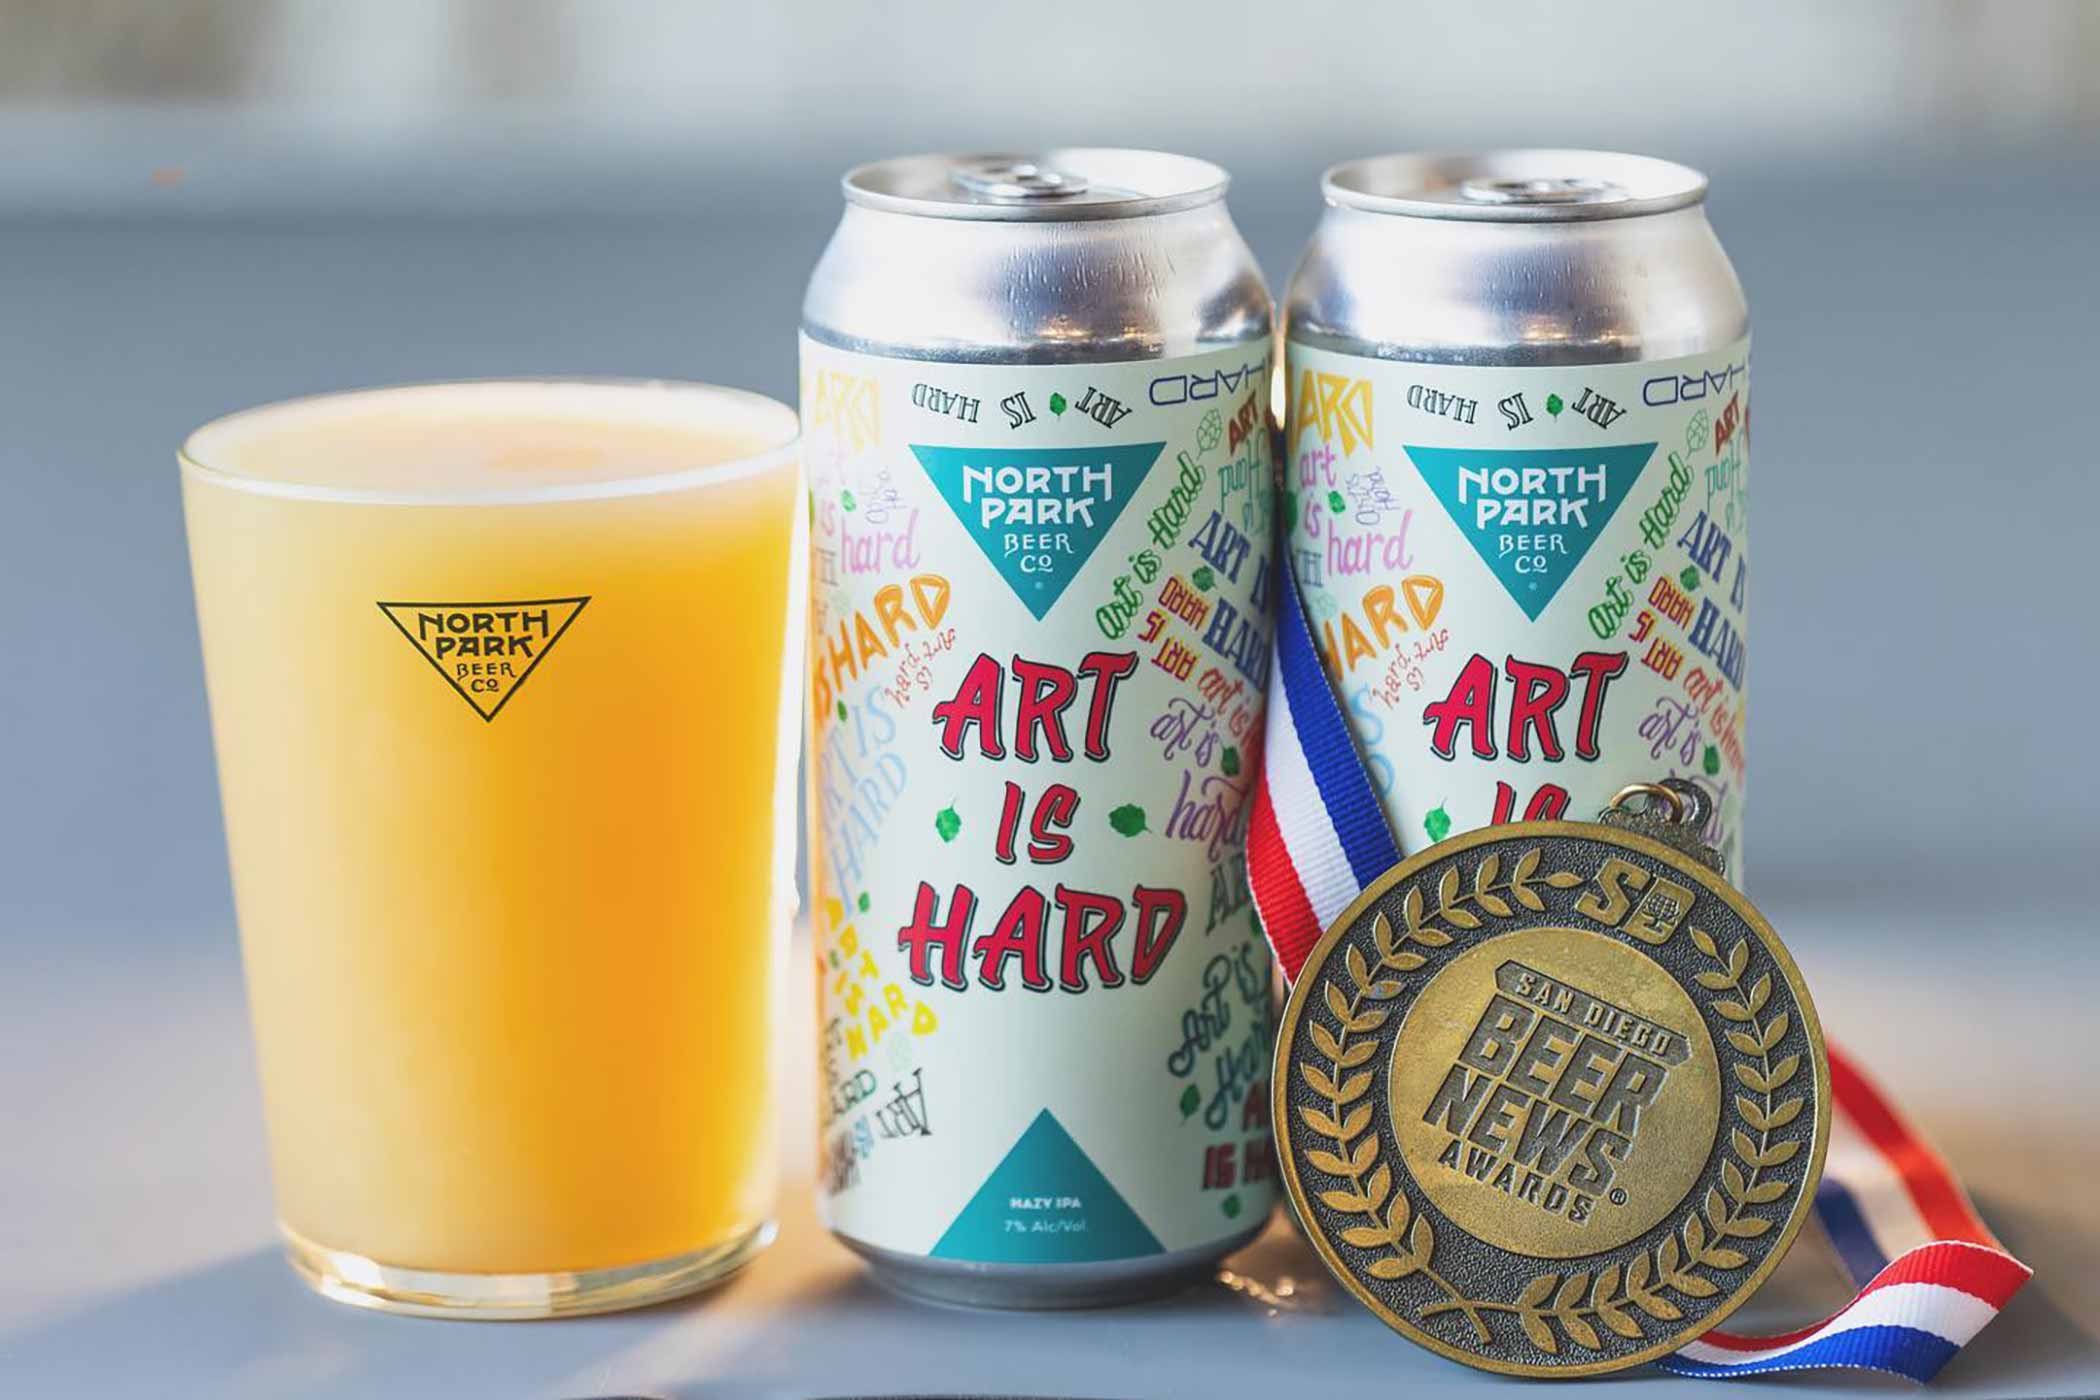 5 Breweries with the Best Hazy IPAs, According to You